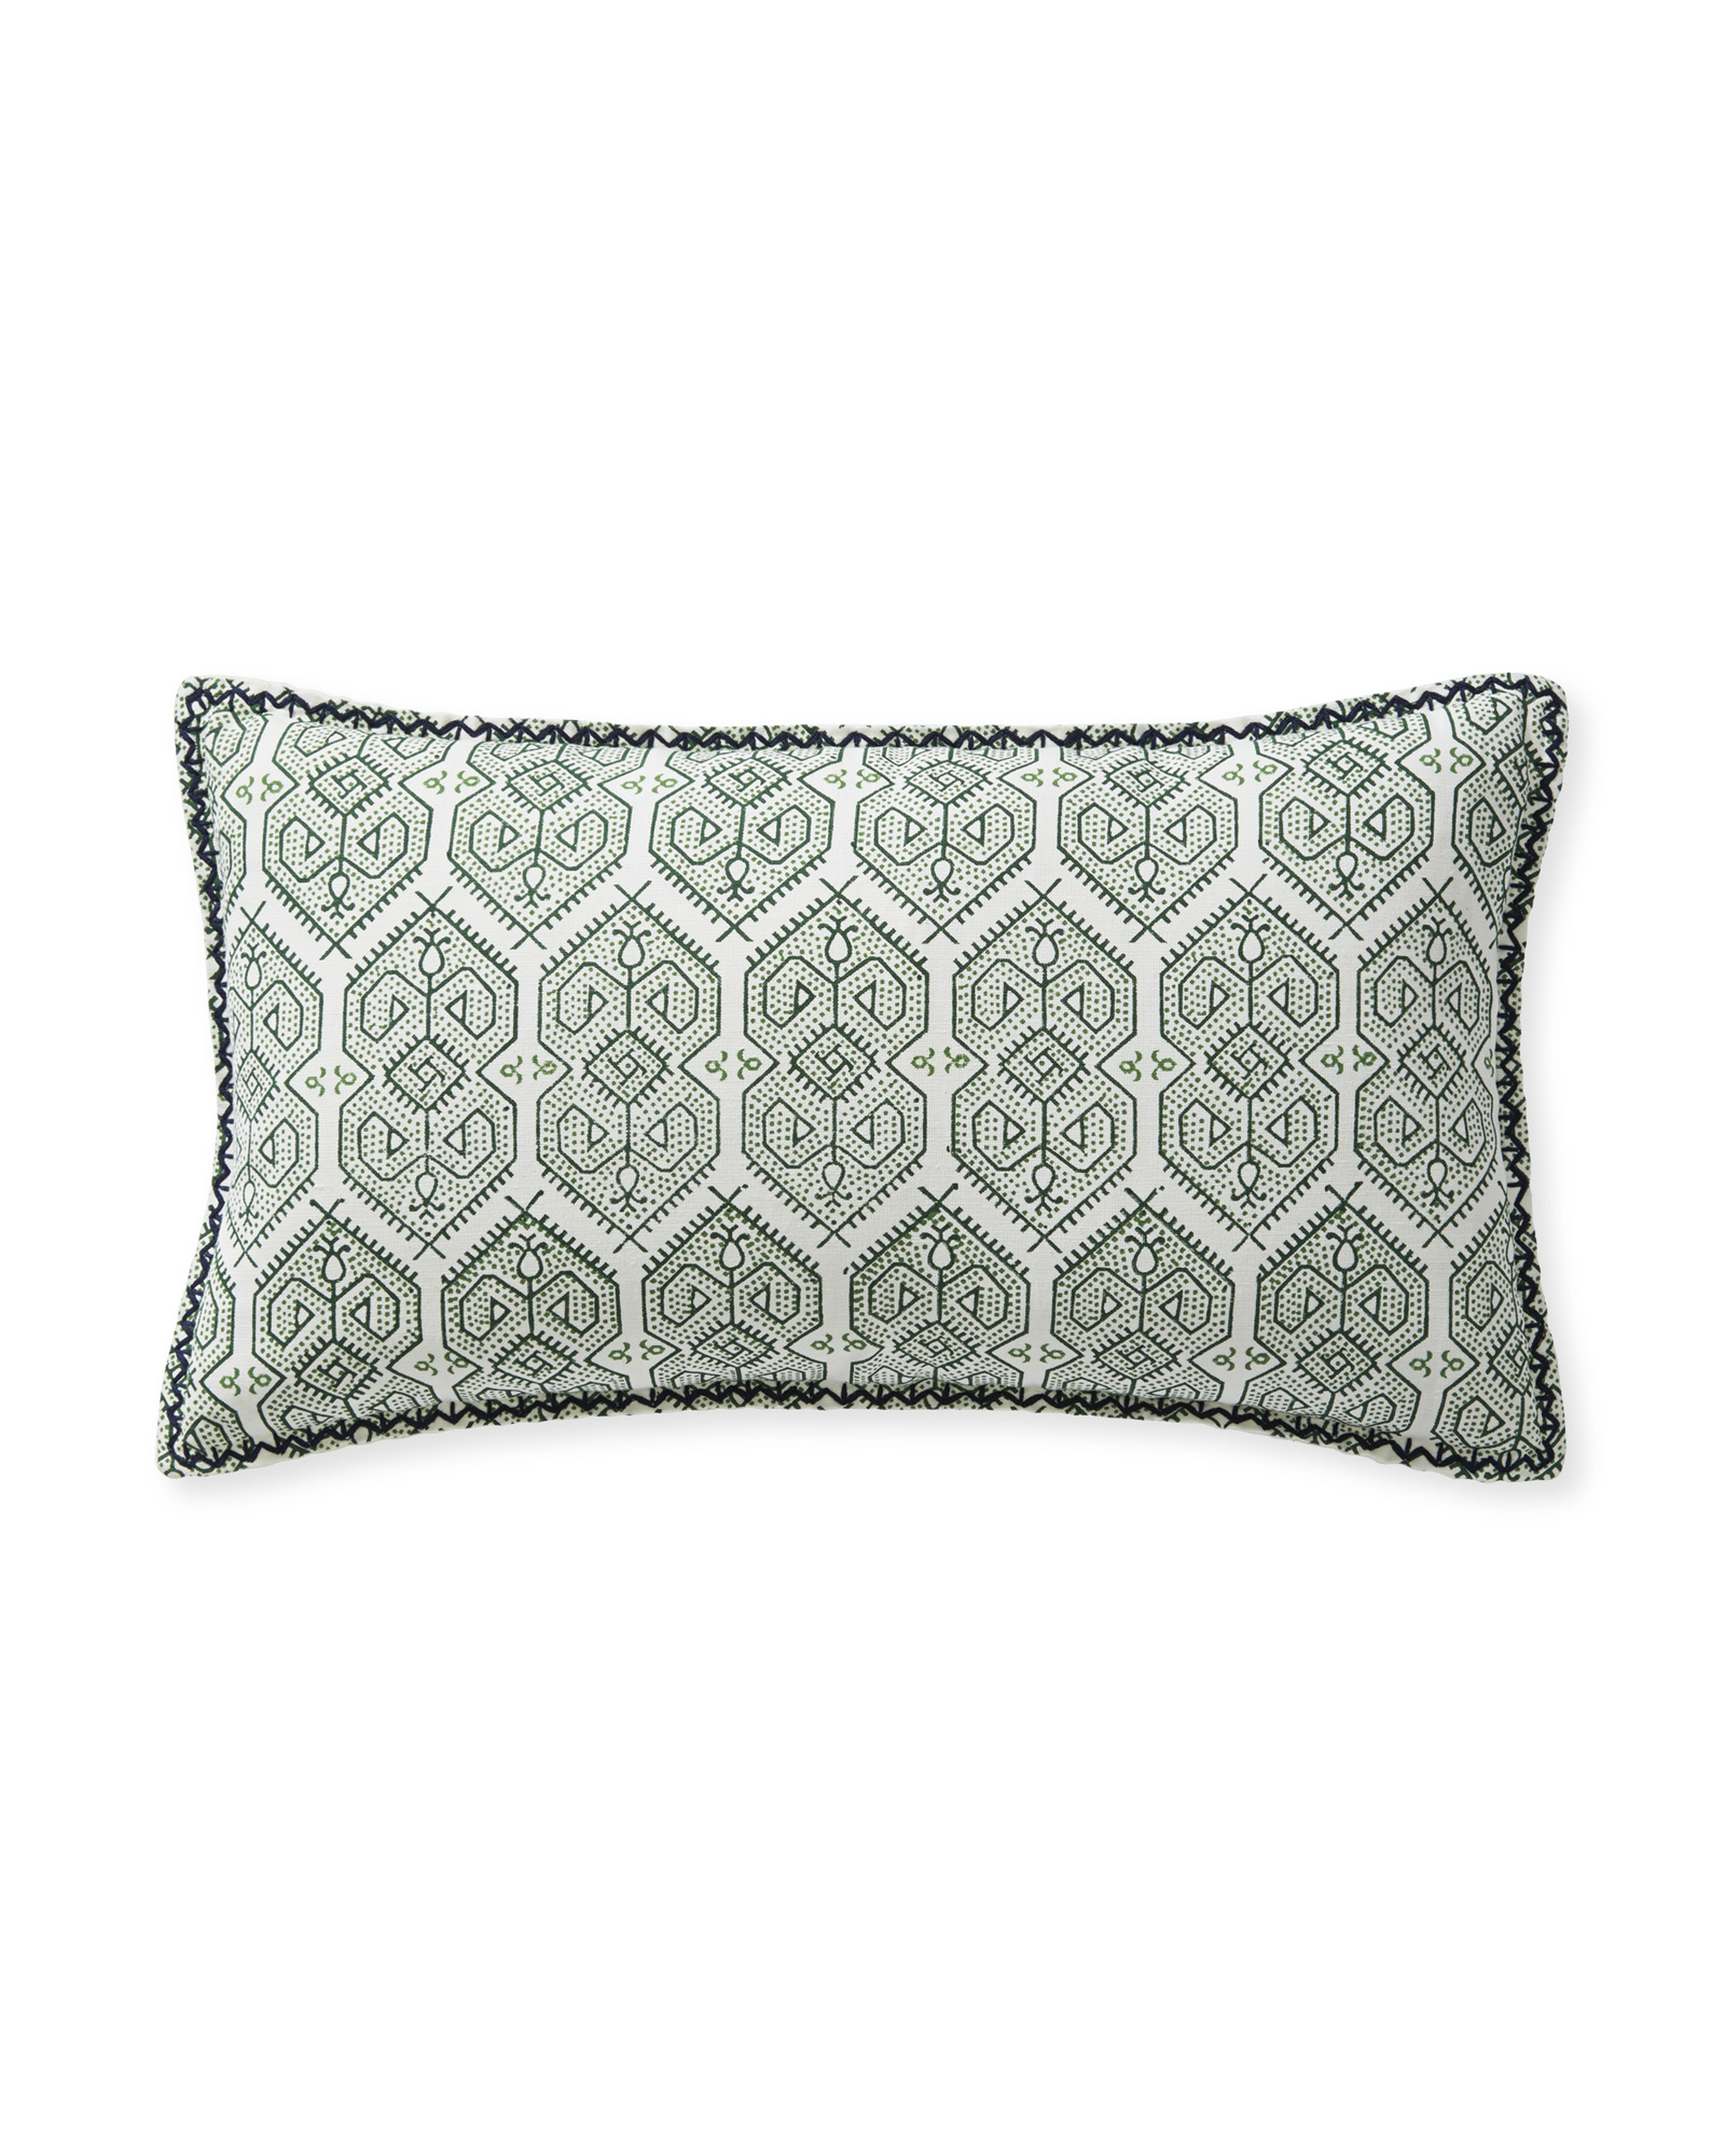 Jamesport 12" x 21" Pillow Cover - Palm Green - Insert sold separately - Serena and Lily